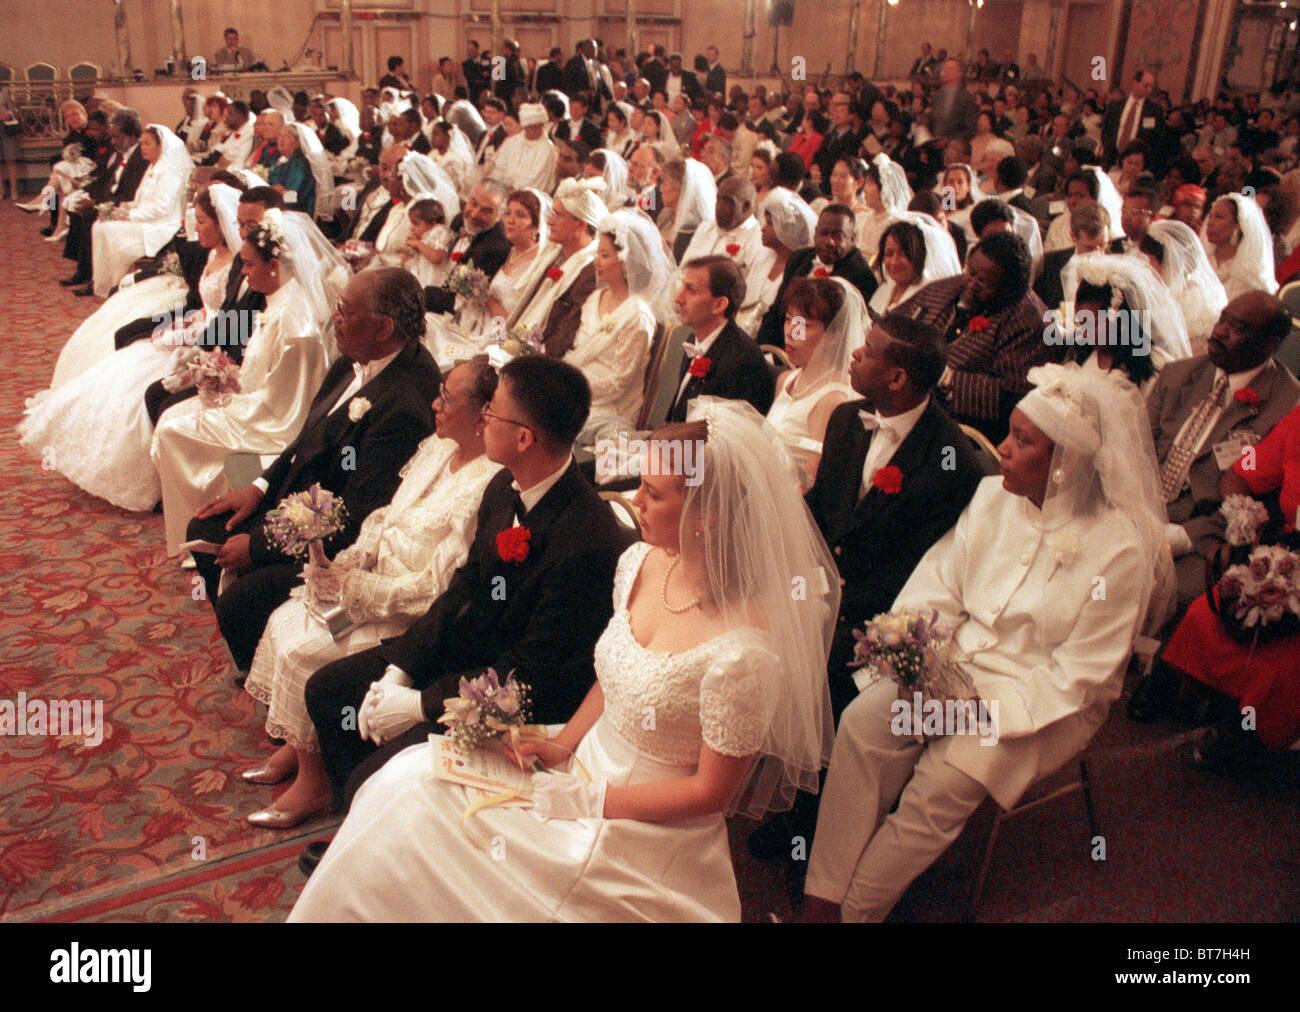 A mass wedding and renewal of vows by the Rev. Sun Myung Moon at the New York Hilton Stock Photo